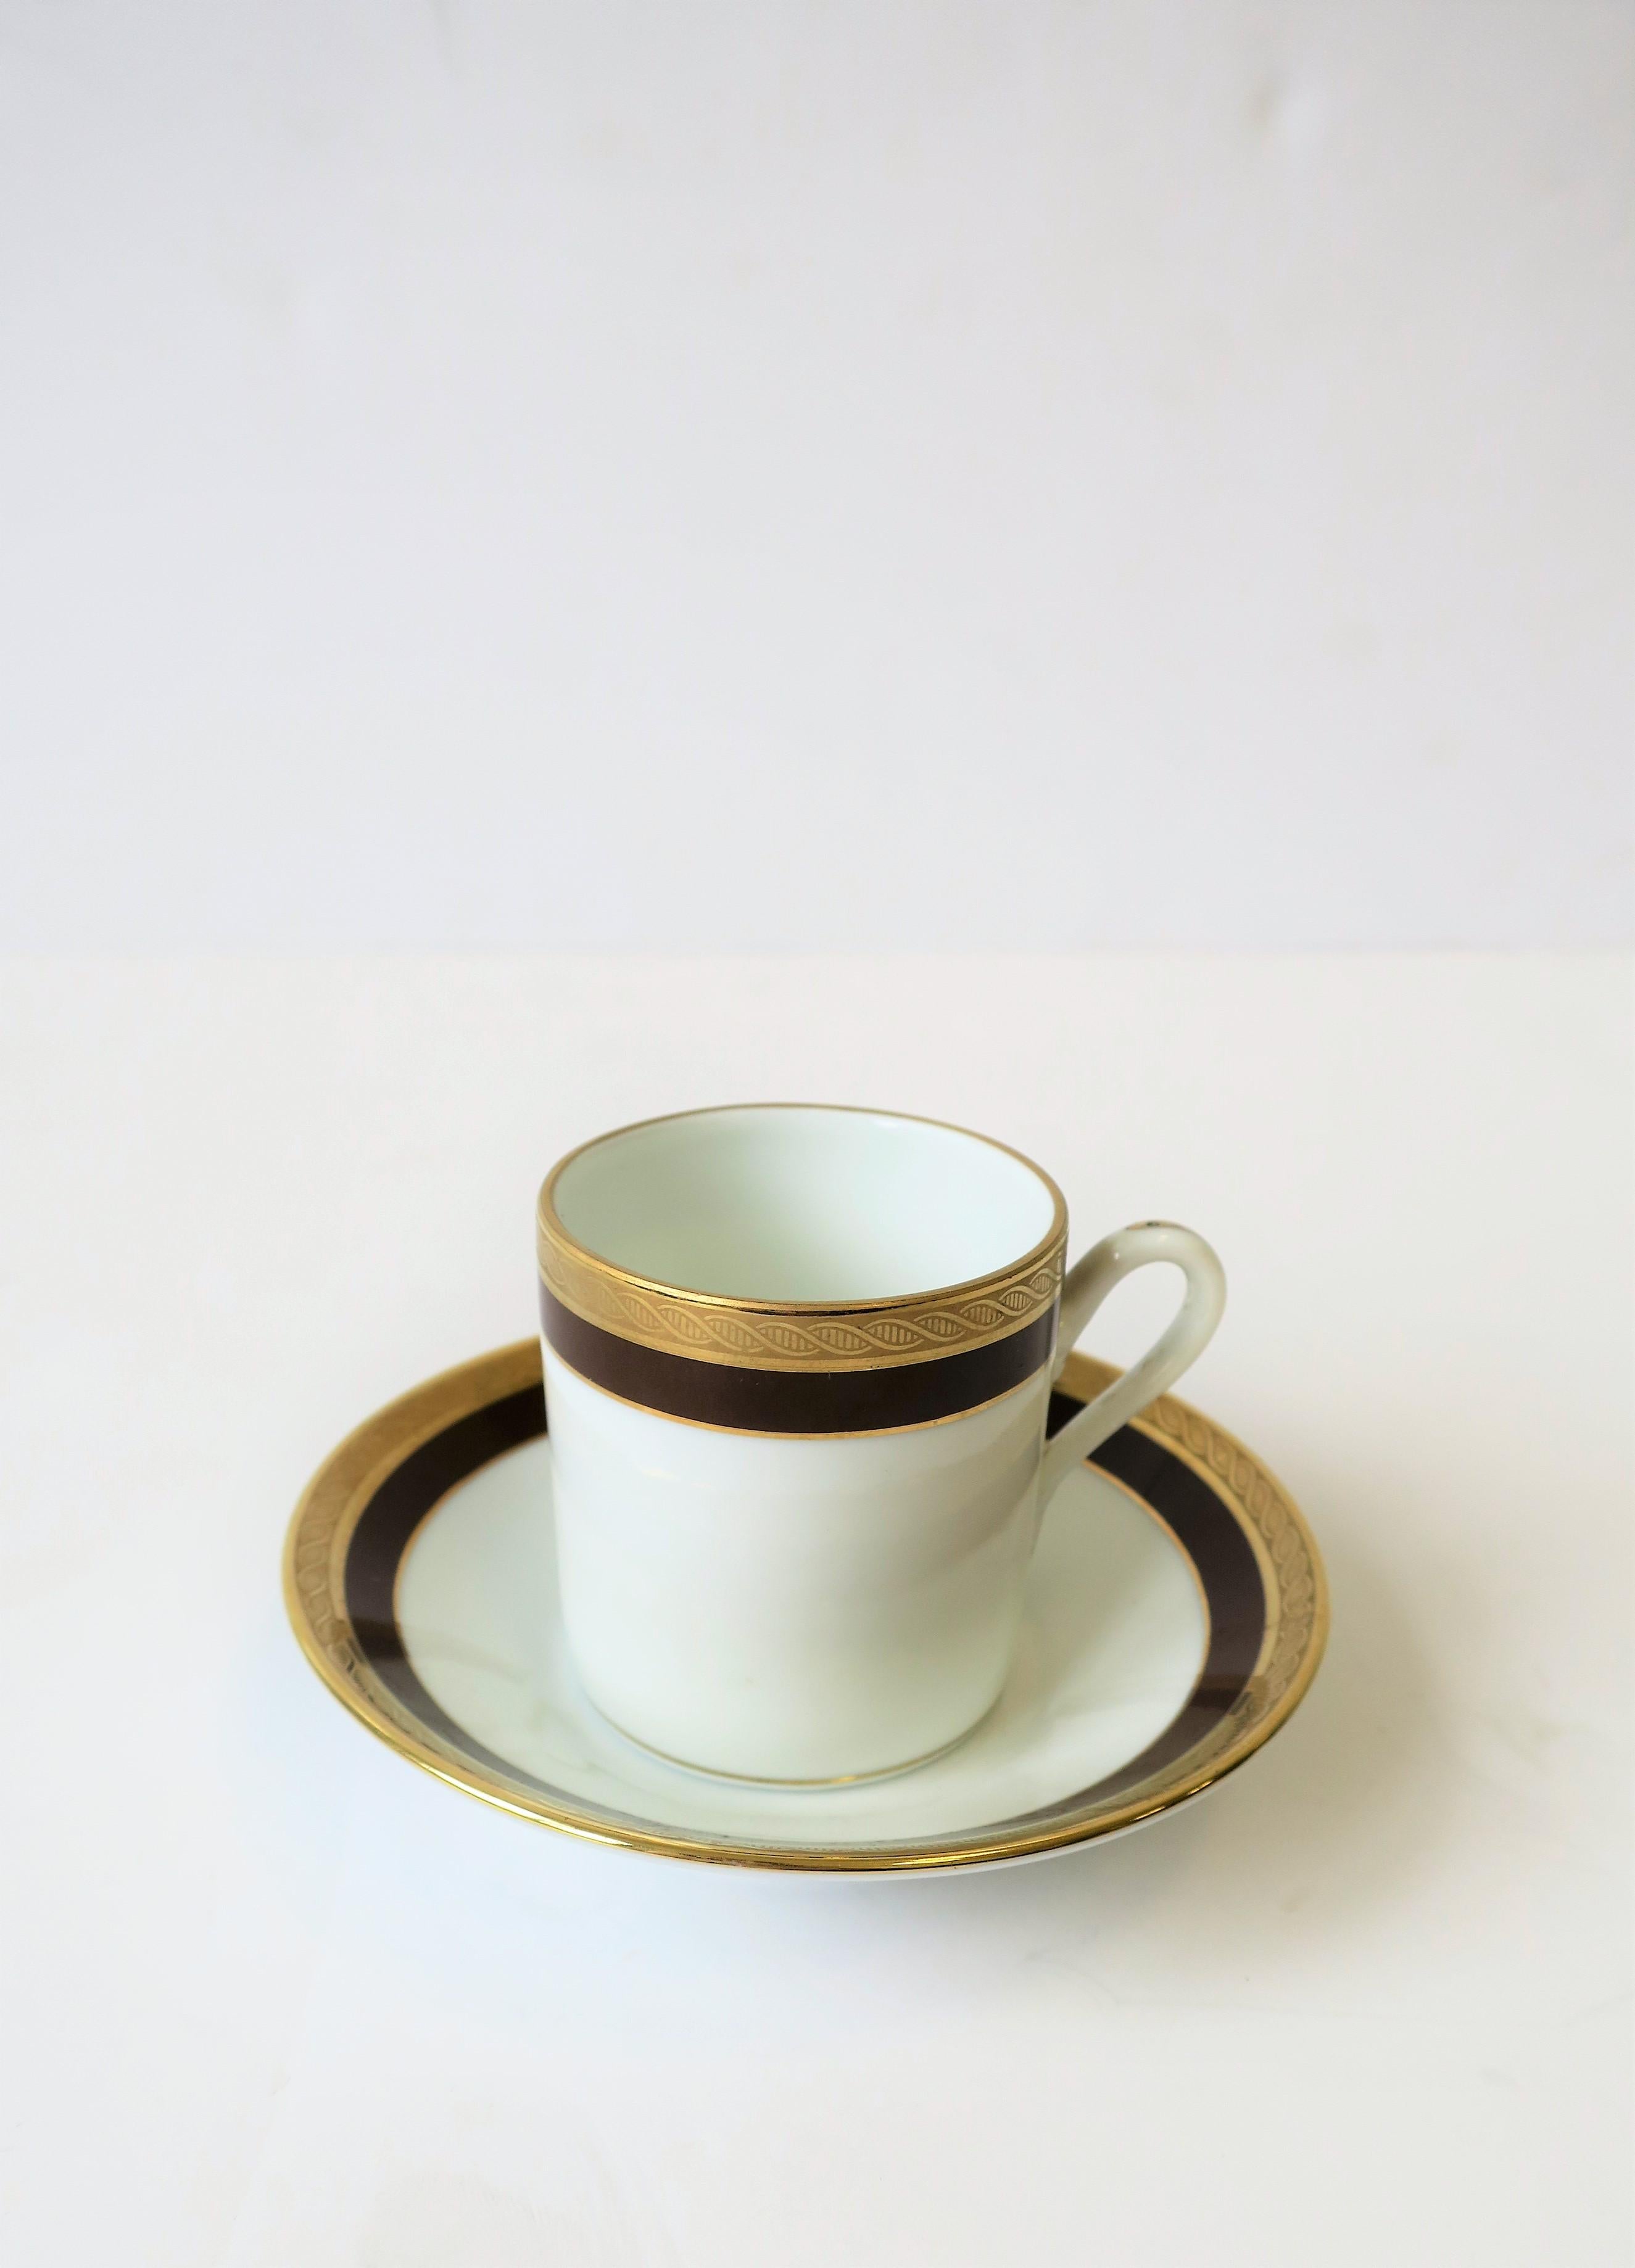 A beautiful Italian white porcelain and gold espresso cup and saucer by designer Richard Ginori, with decorative gold band detail, circa mid-20th century, Italy. Colors include chocolate brown, white and gold. With maker's mark on back as show in